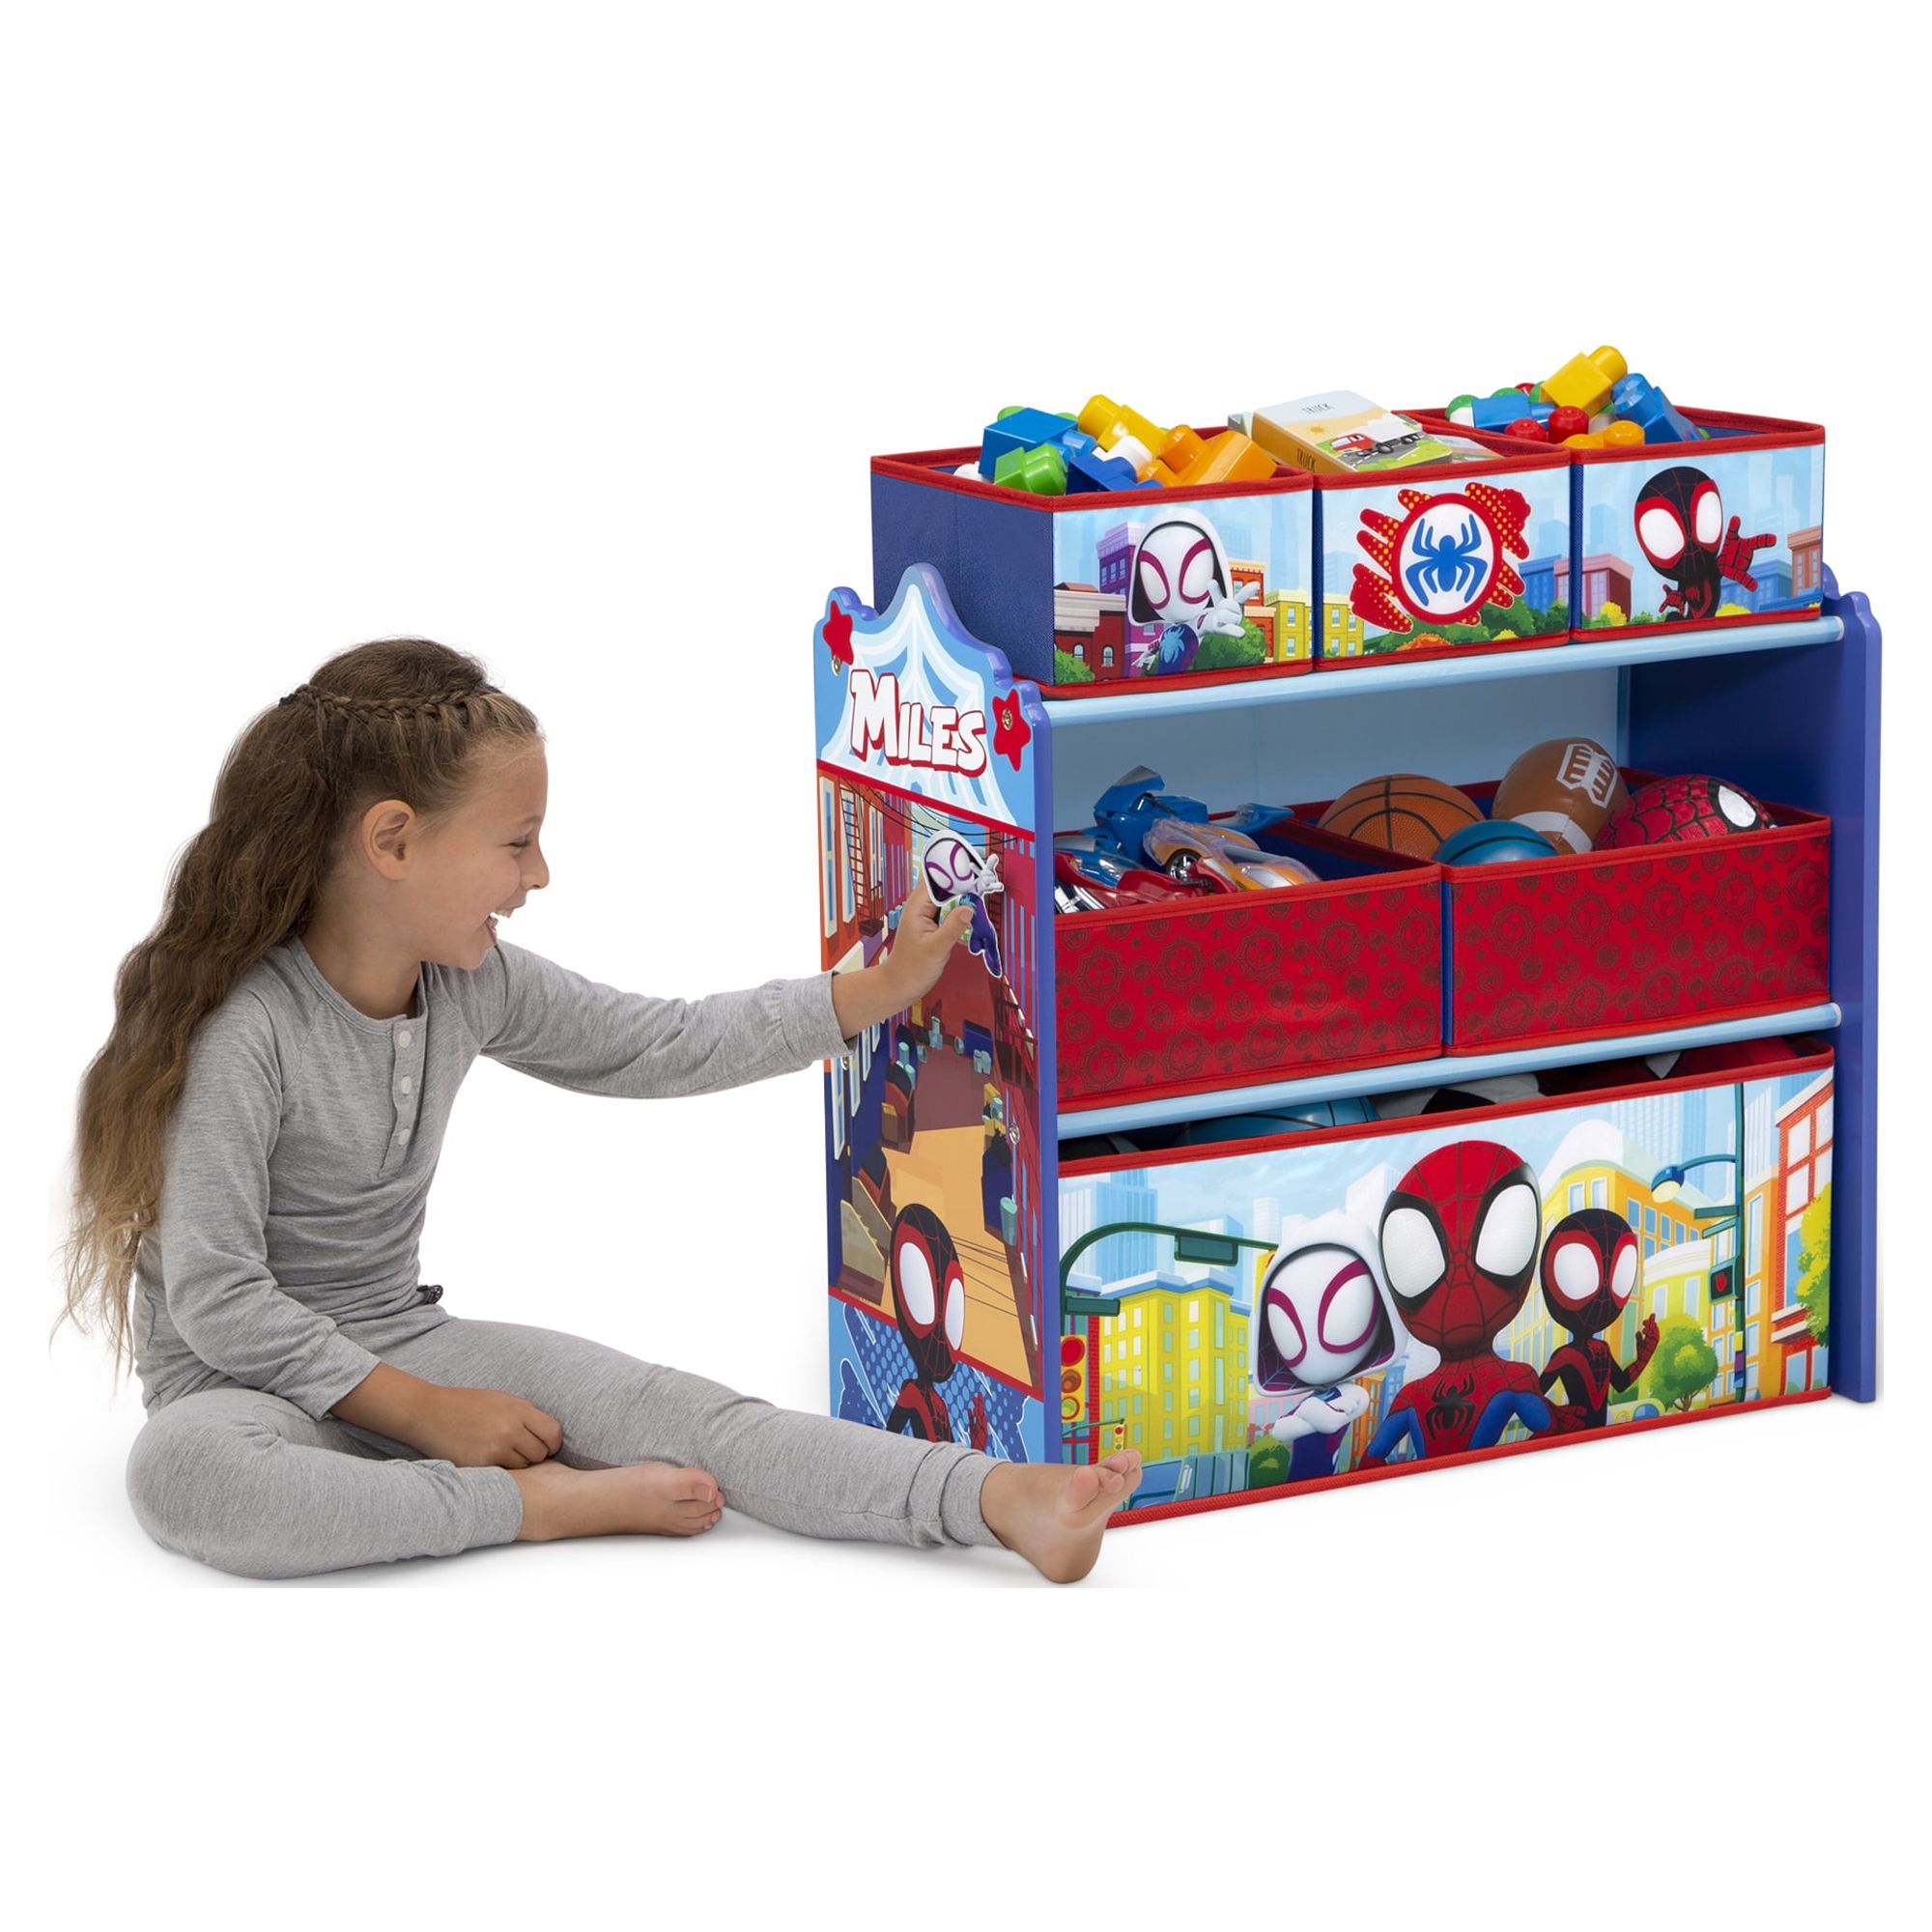 Marvel Spidey and His Amazing Friends 4-Piece Toddler Playroom Set by Delta Children – Includes Play Table with Dry Erase Tabletop and 6 Bin Toy Organizer with Reusable Vinyl Cling Stickers, Blue - image 5 of 11